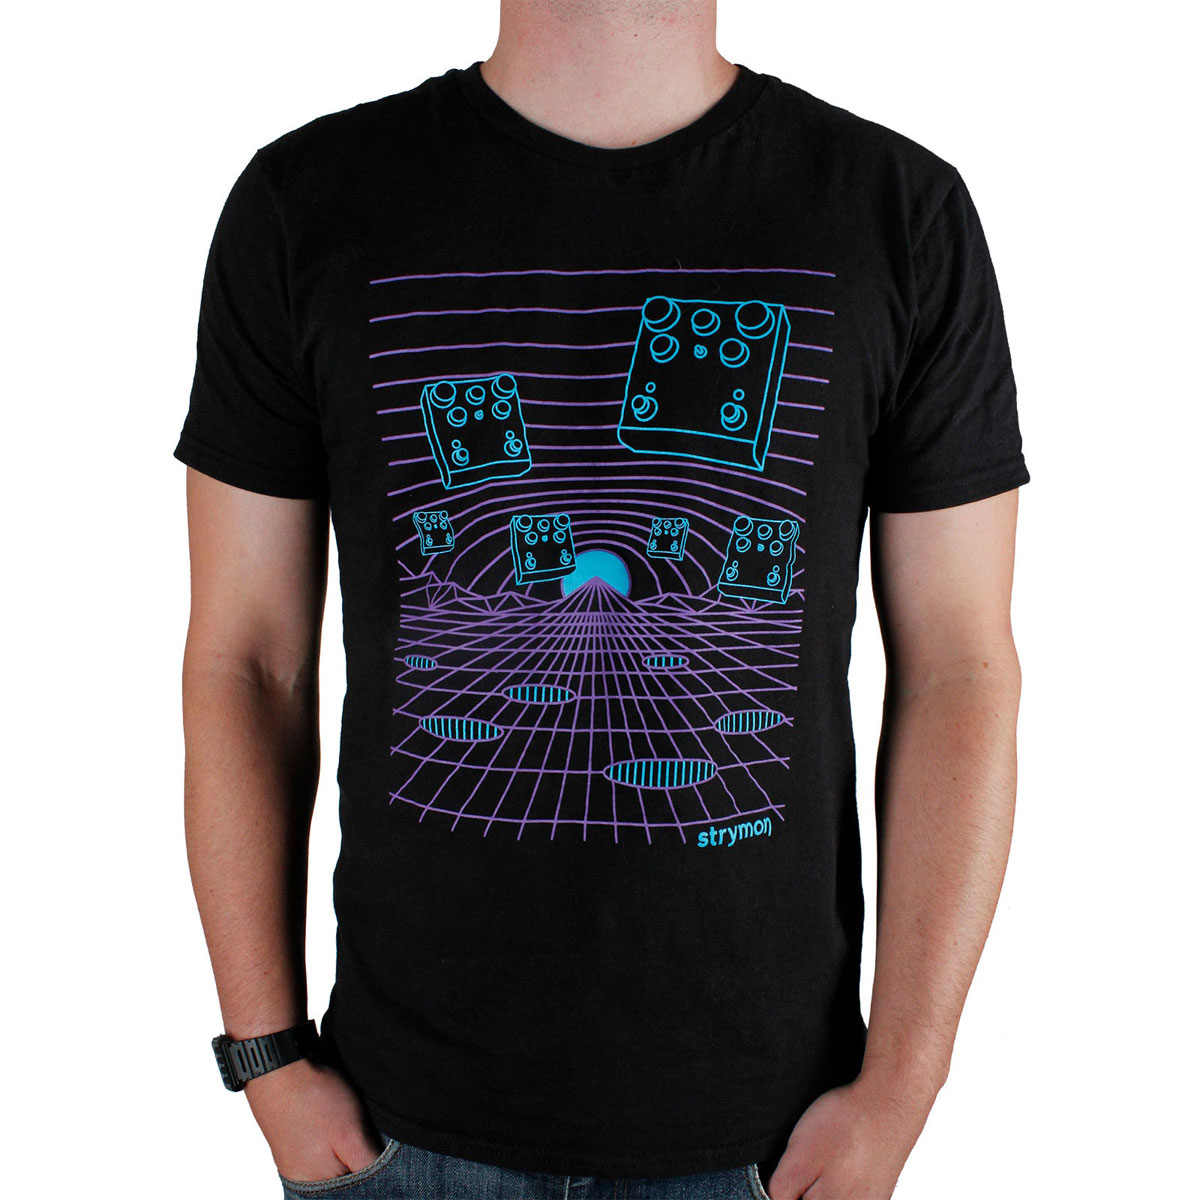 STRYMON S SIZE - PEDALS IN SPACE T-SHIRT